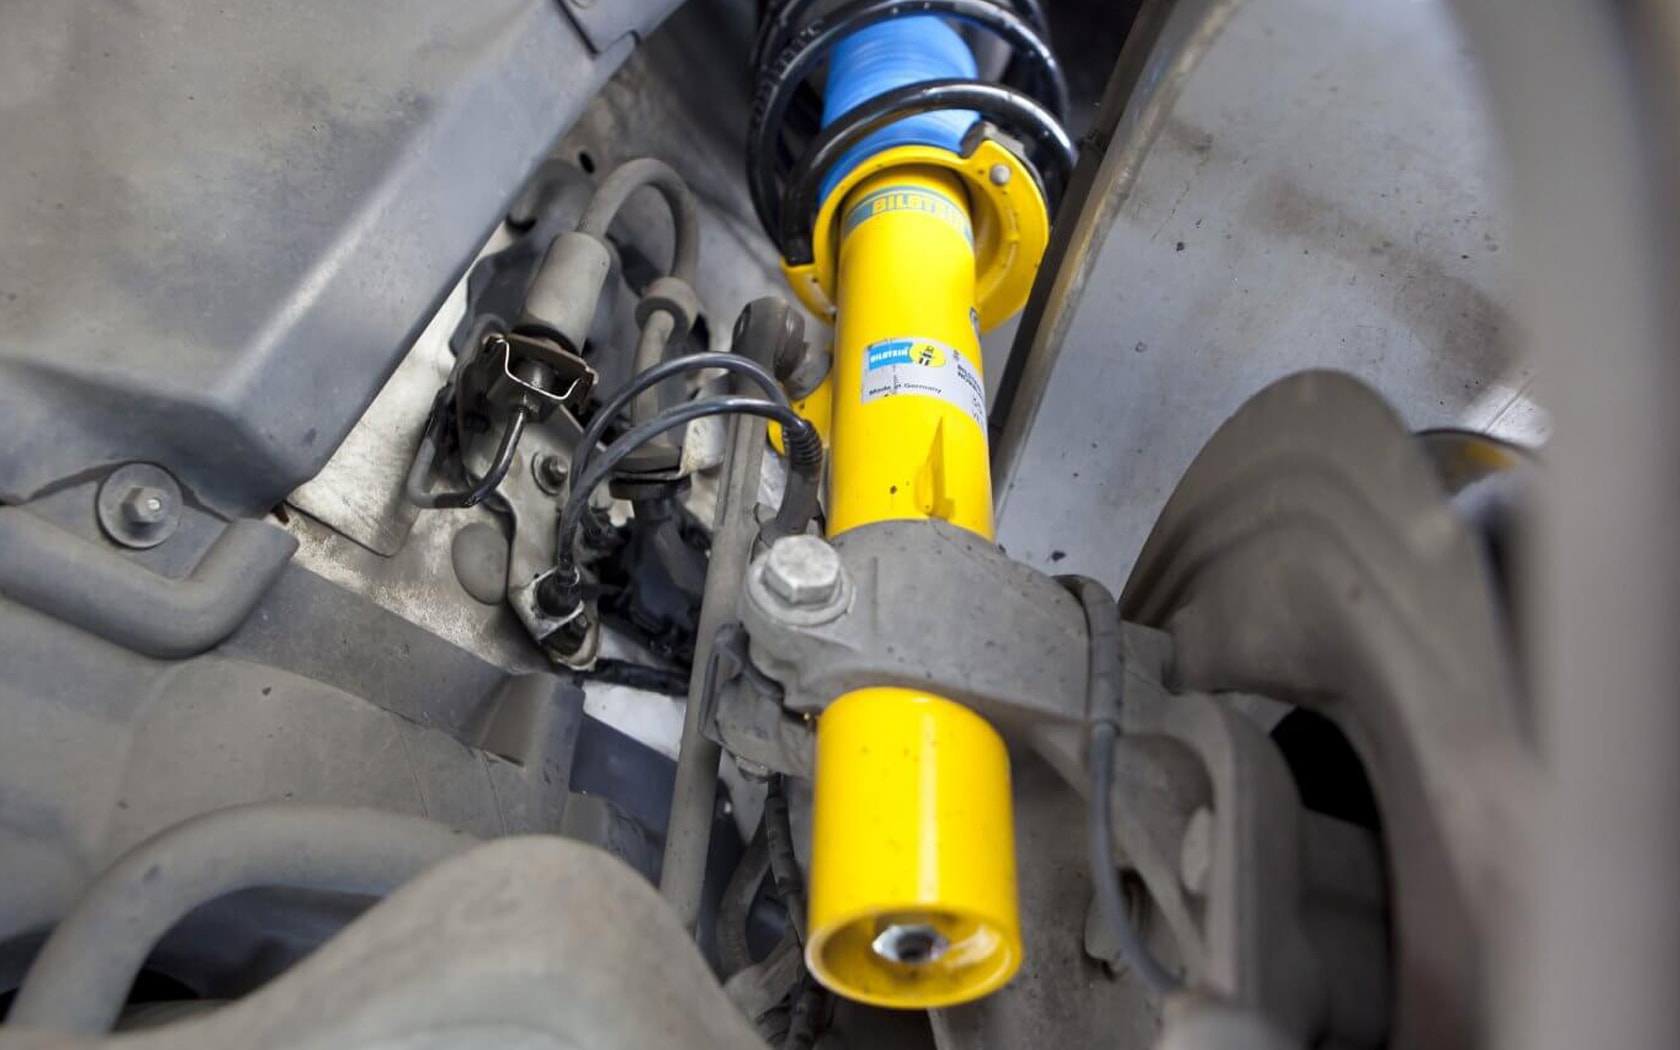 Signs of A Faulty Shock Absorber - Monticello Auto Service